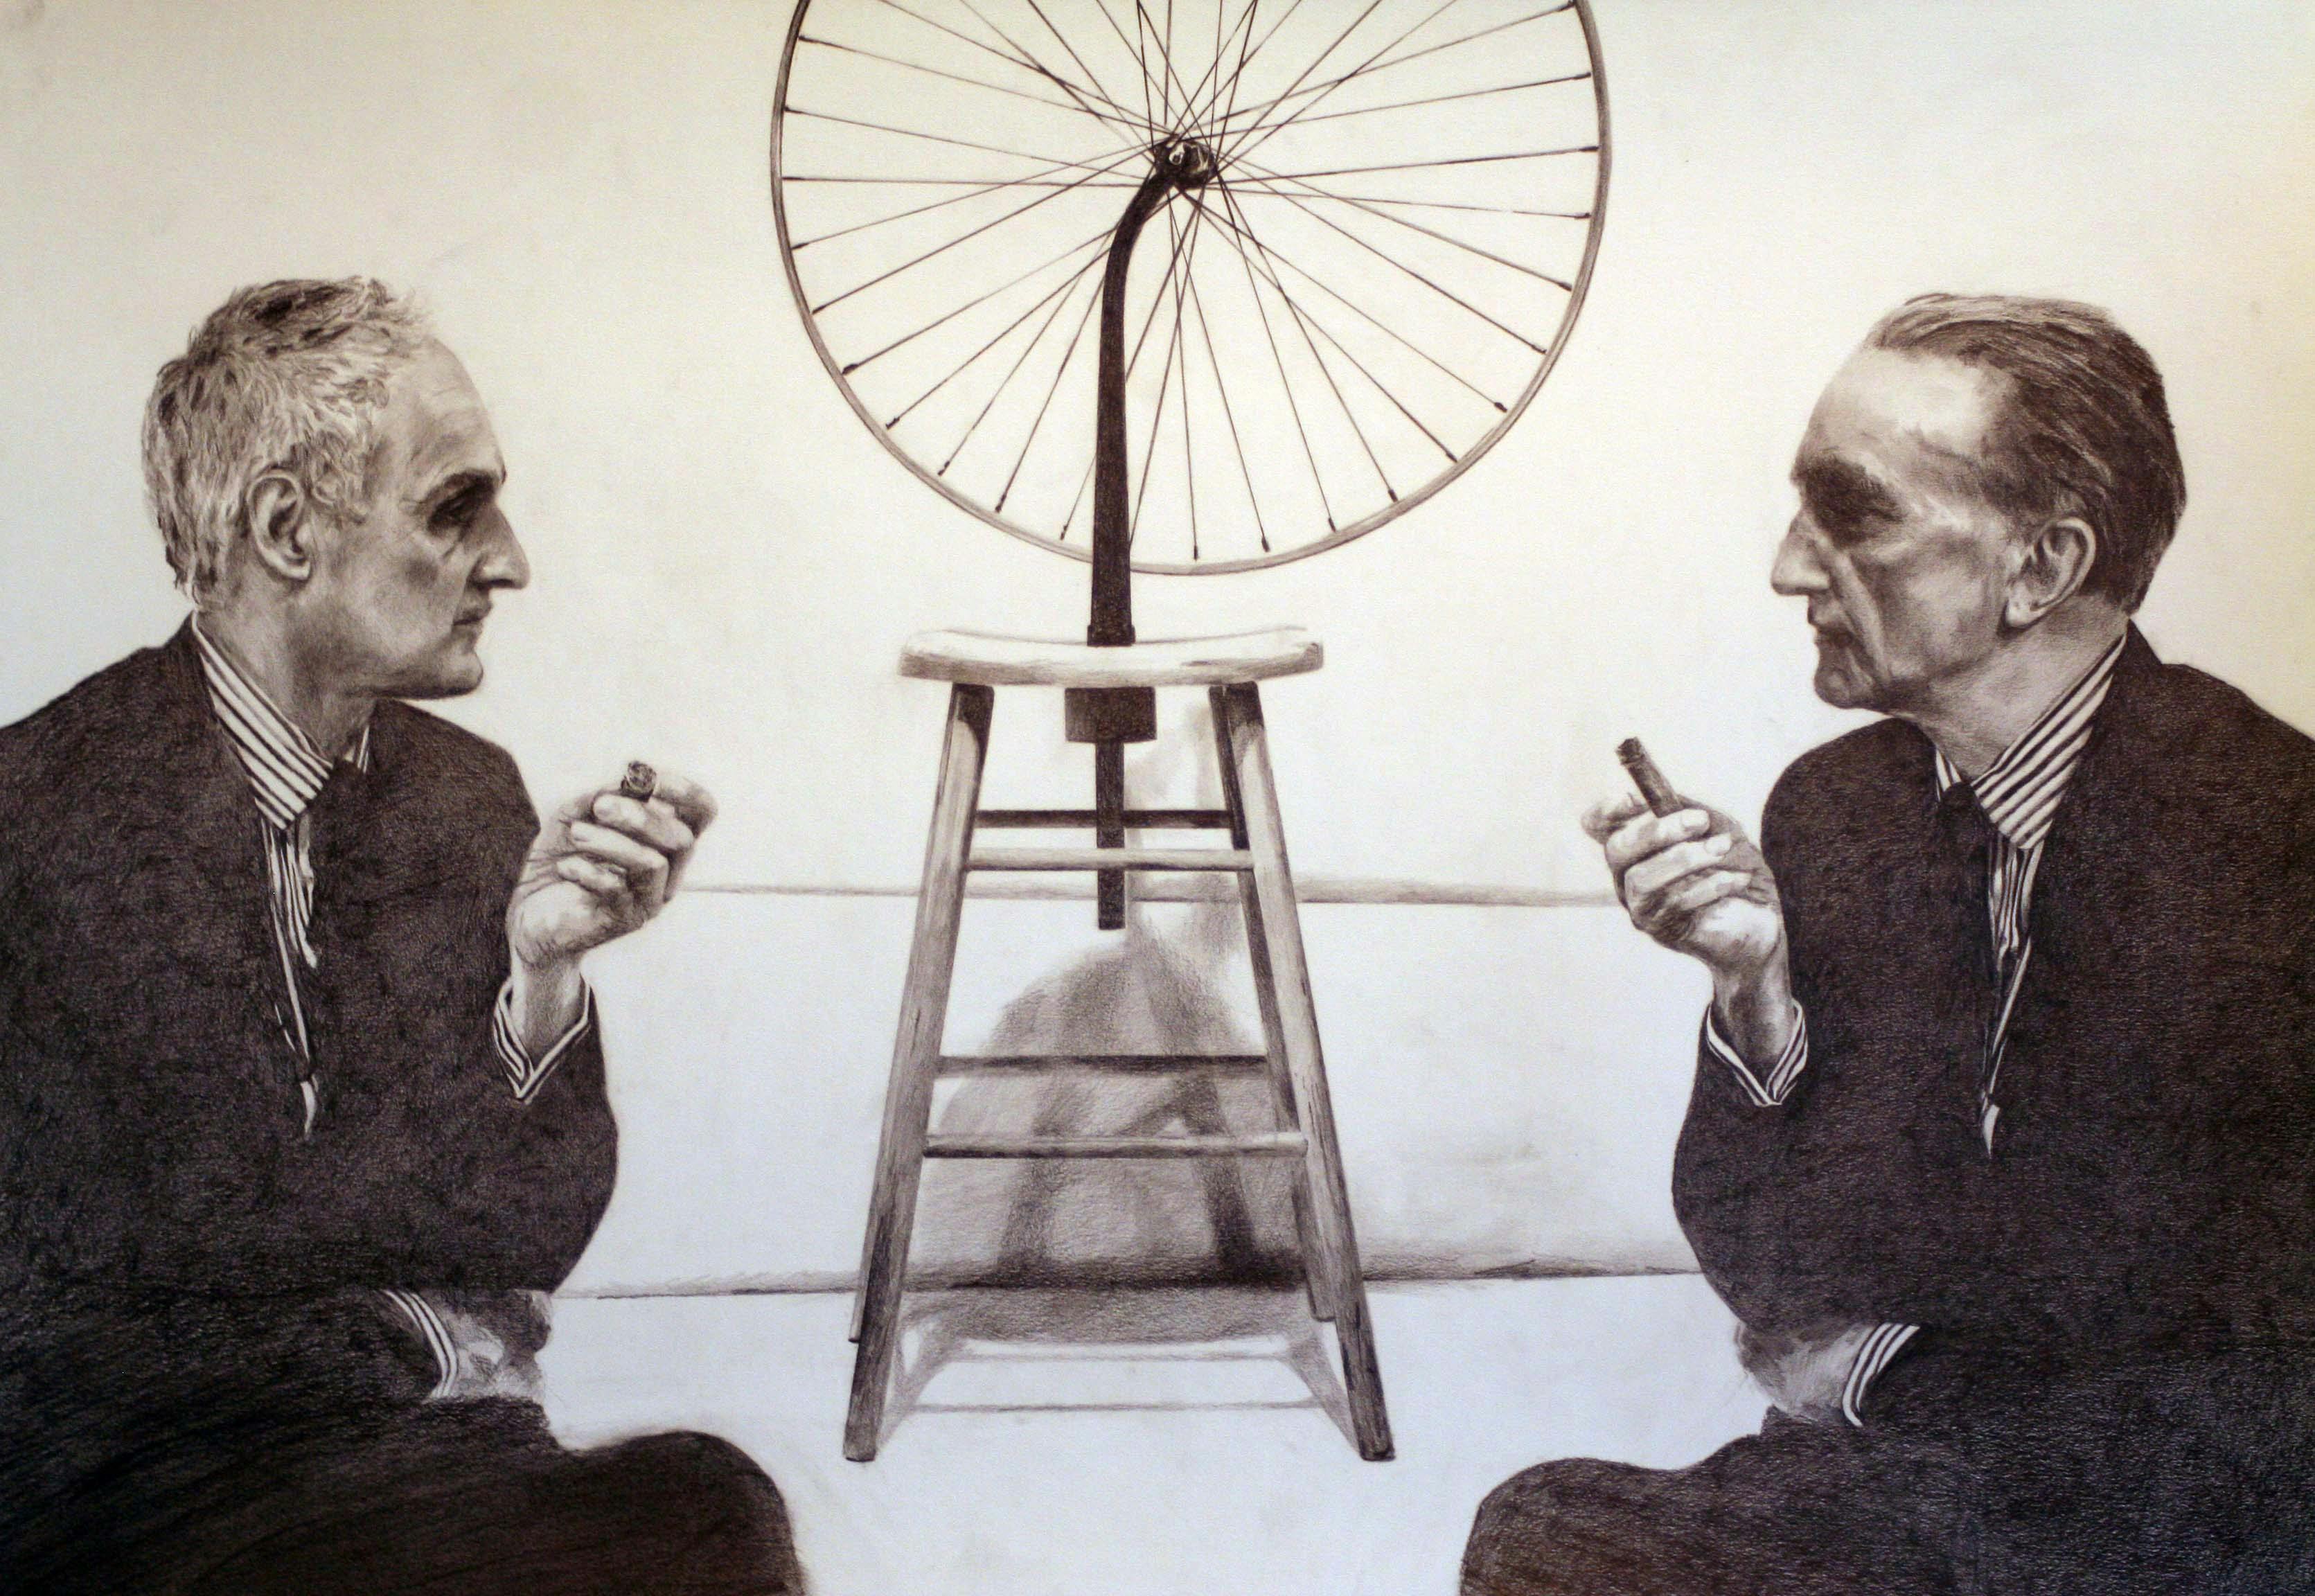 A black and white photograph of two people sitting face to face. They wear identical suit and hold cigarettes to mirror each other. Behind them, Marcel Duchamp’s sculpture titled Bicycle Wheel sits on the floor.